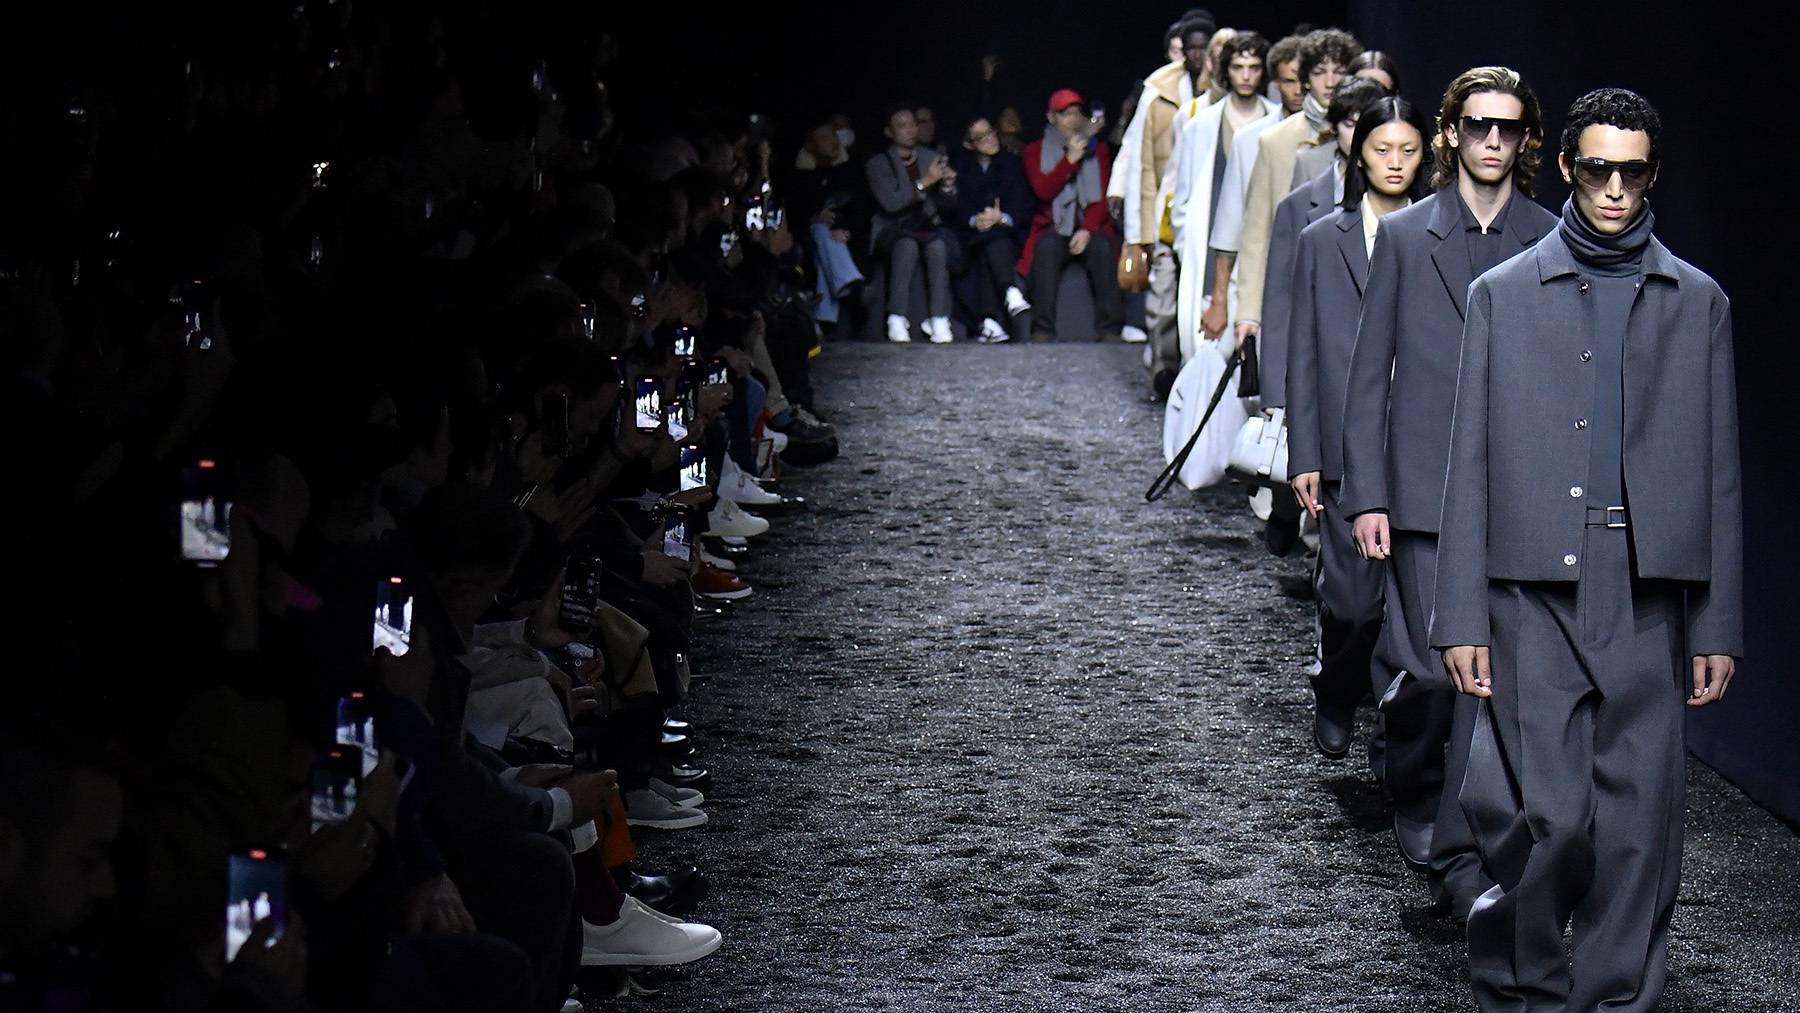 Zegna is one of the biggest beneficiaries of the "quiet luxury" trend.